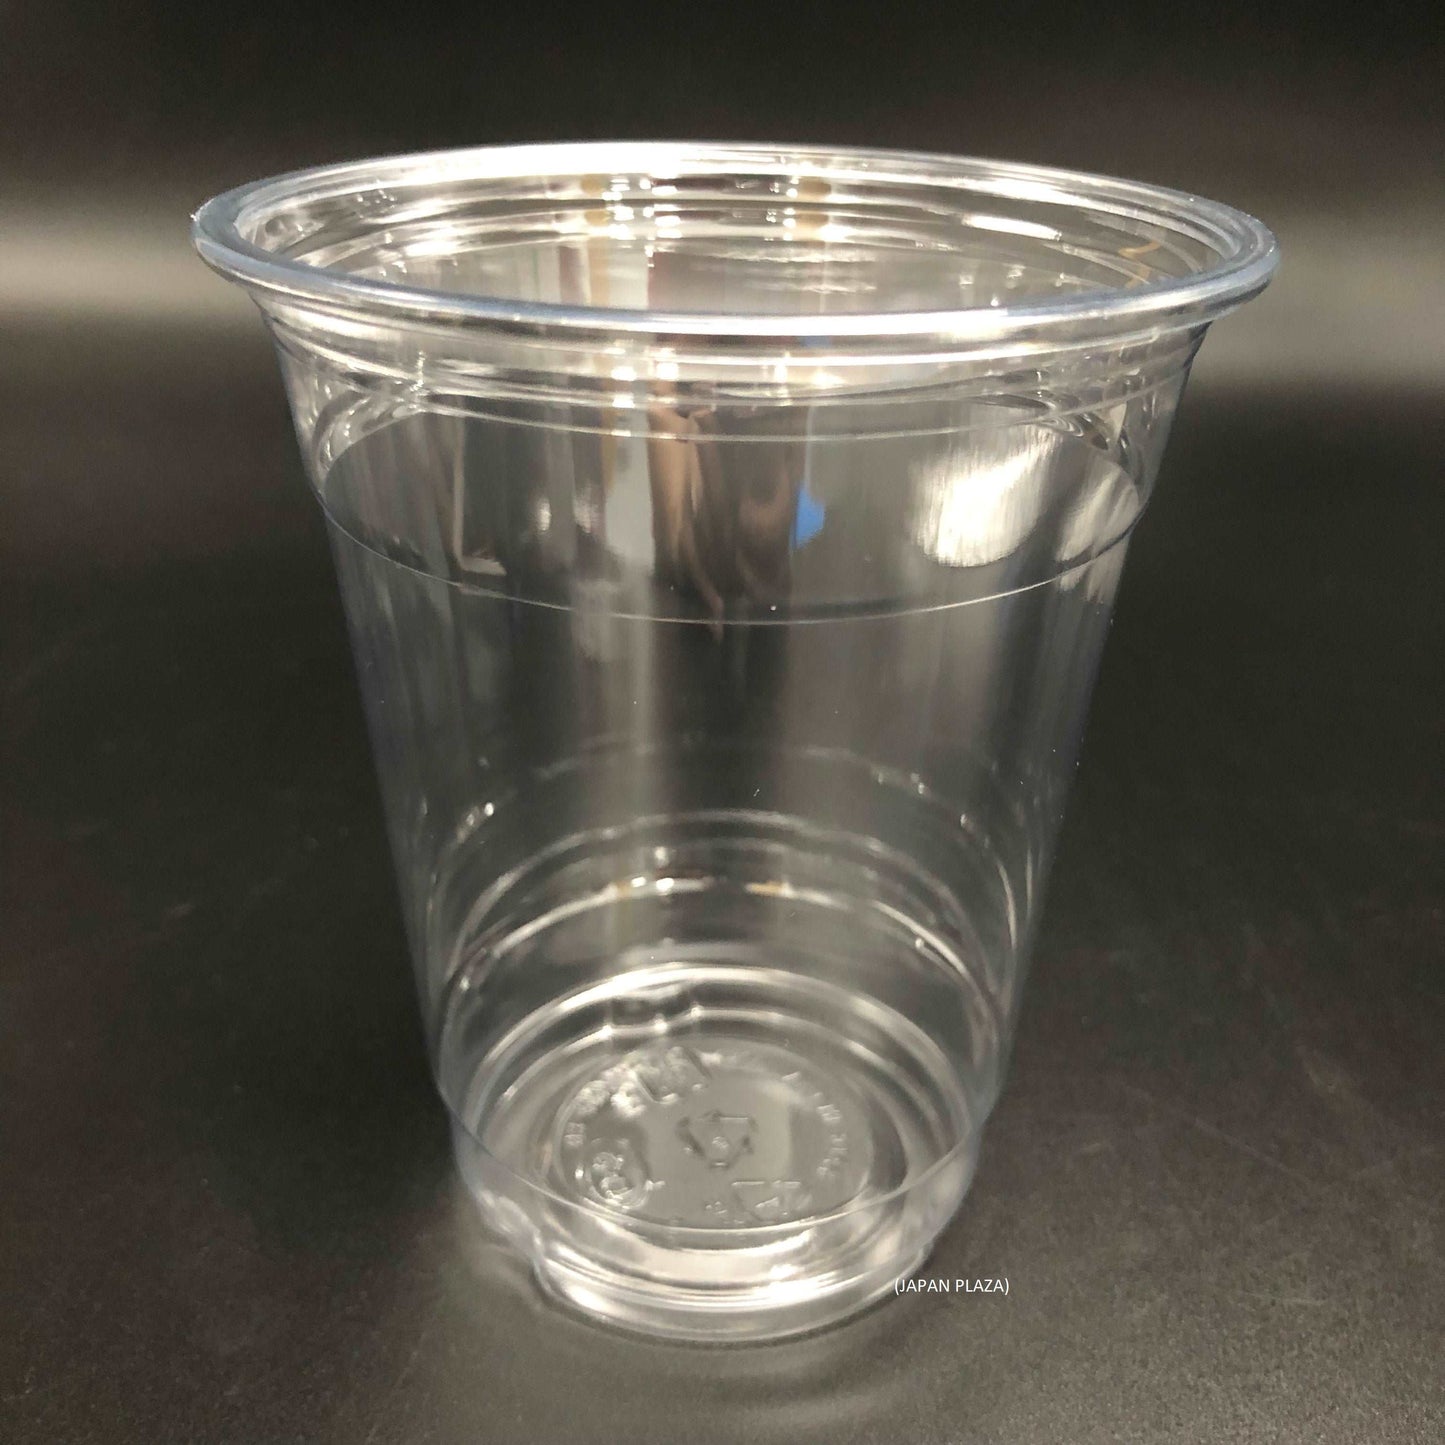 Disposable Cup 410ml x8pcs (Made in Thailand)